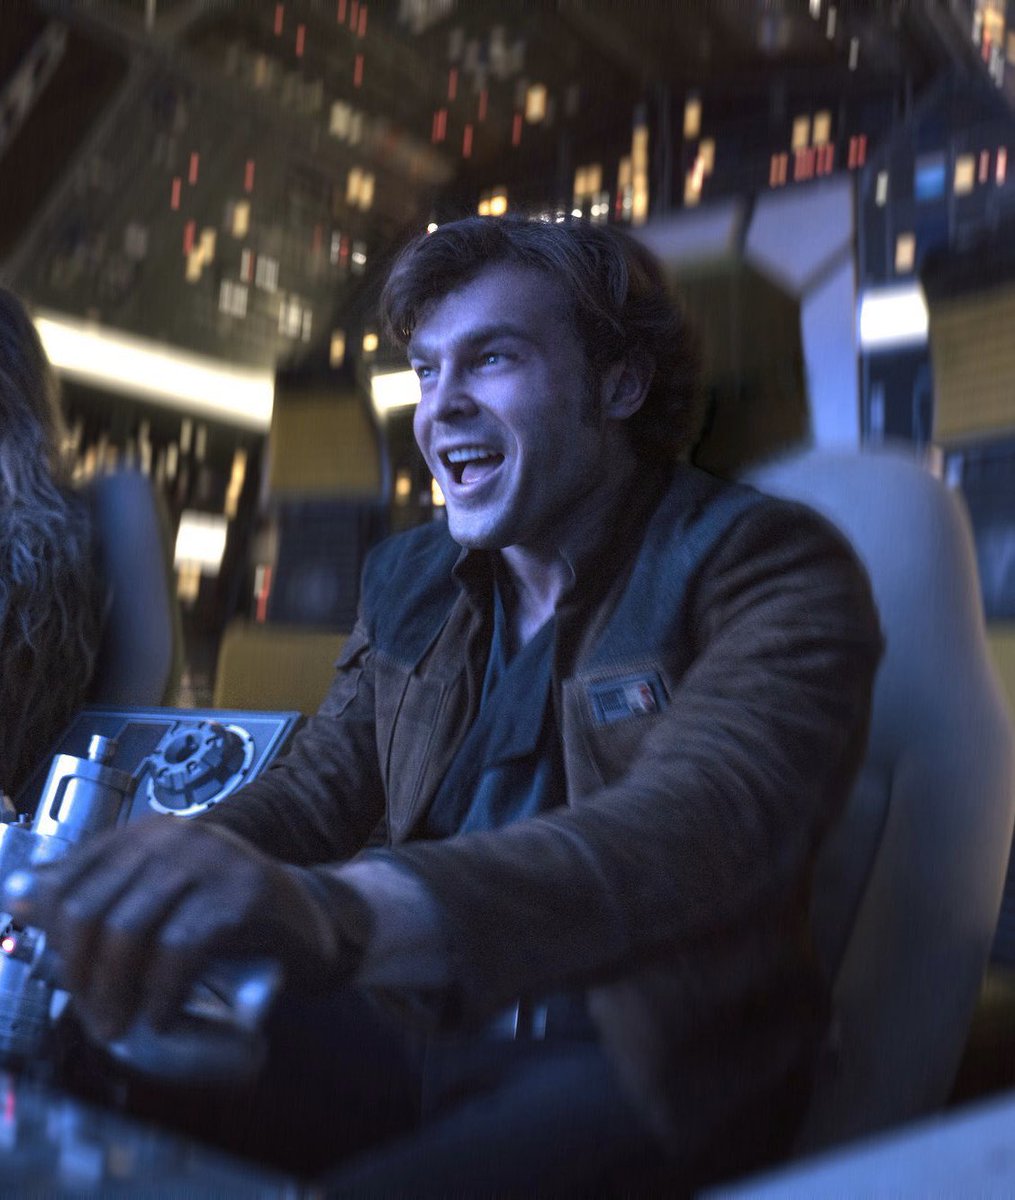 Every single thing about Han in The Force Awakens is amplified and made better because of Han in Solo. 100%. The connective tissue is right there when old Han says he “used to be” Han Solo. A name thrust upon him that he claimed and molded into the guy he wanted to be.